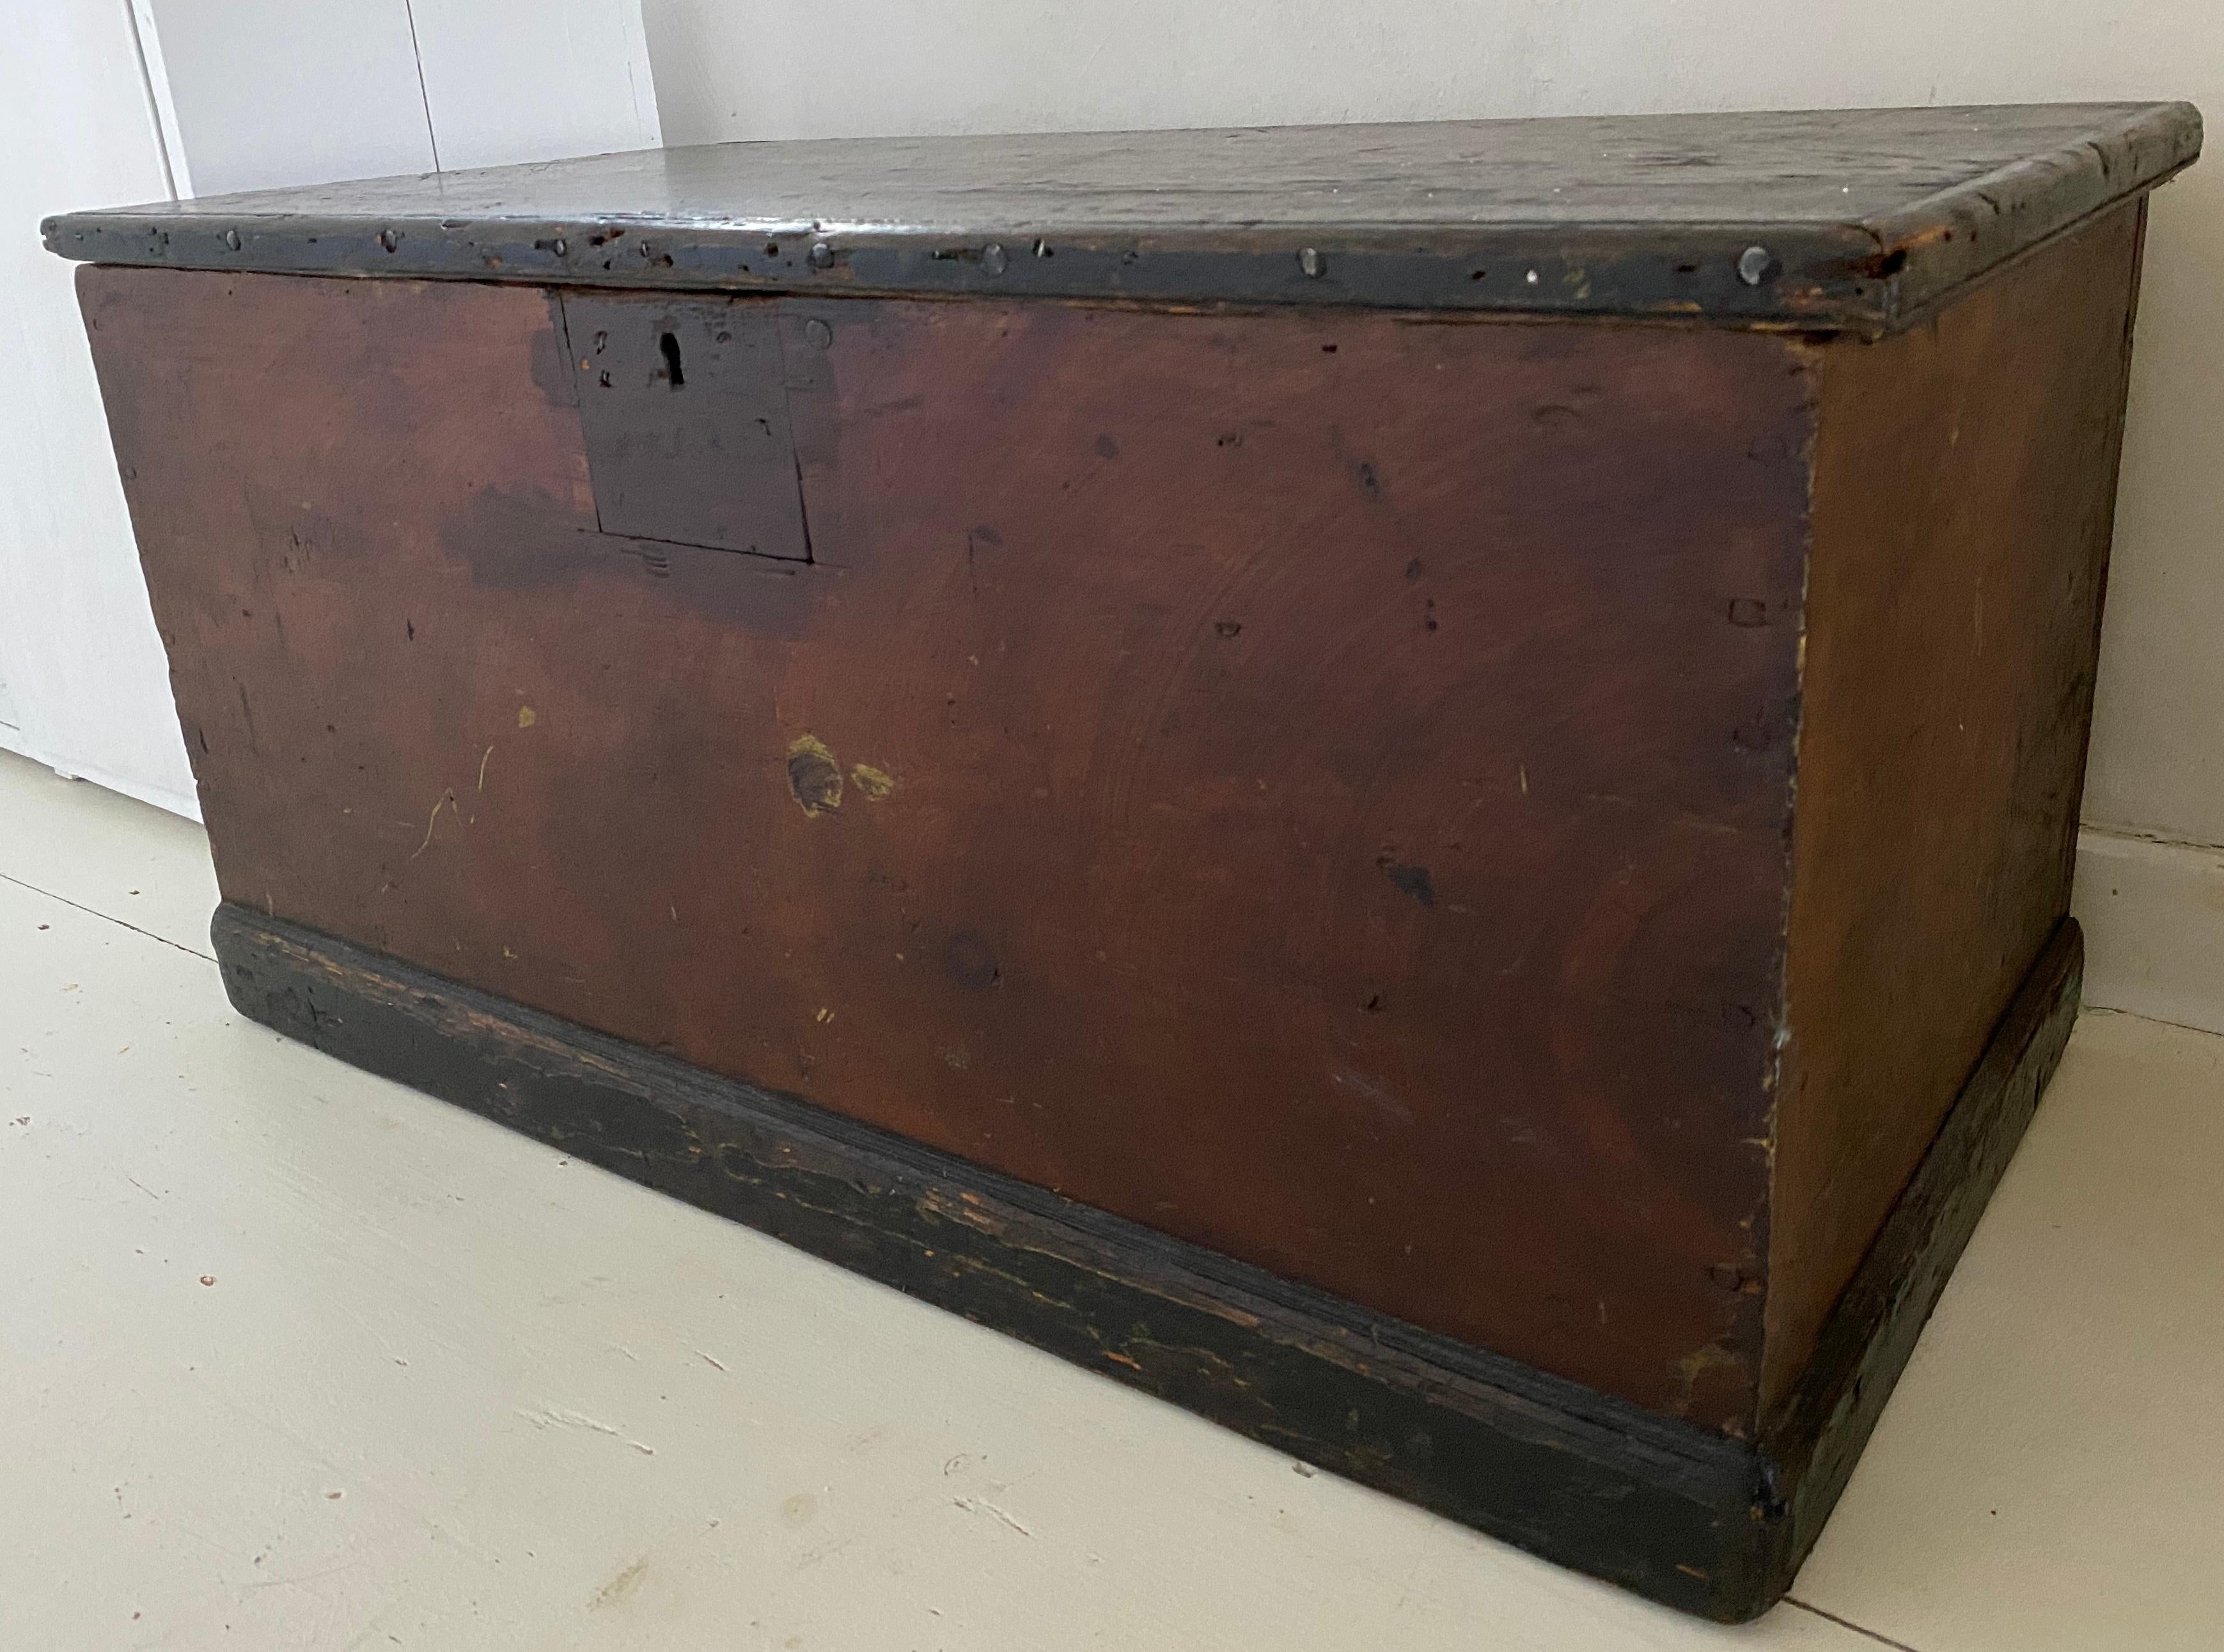 19th century rustic American chest or floor trunk. Can be used for storage or coffee table. Place the blanket chest at the bottom of a bed or in a mud room and add a cushion for a bit of height for seating.